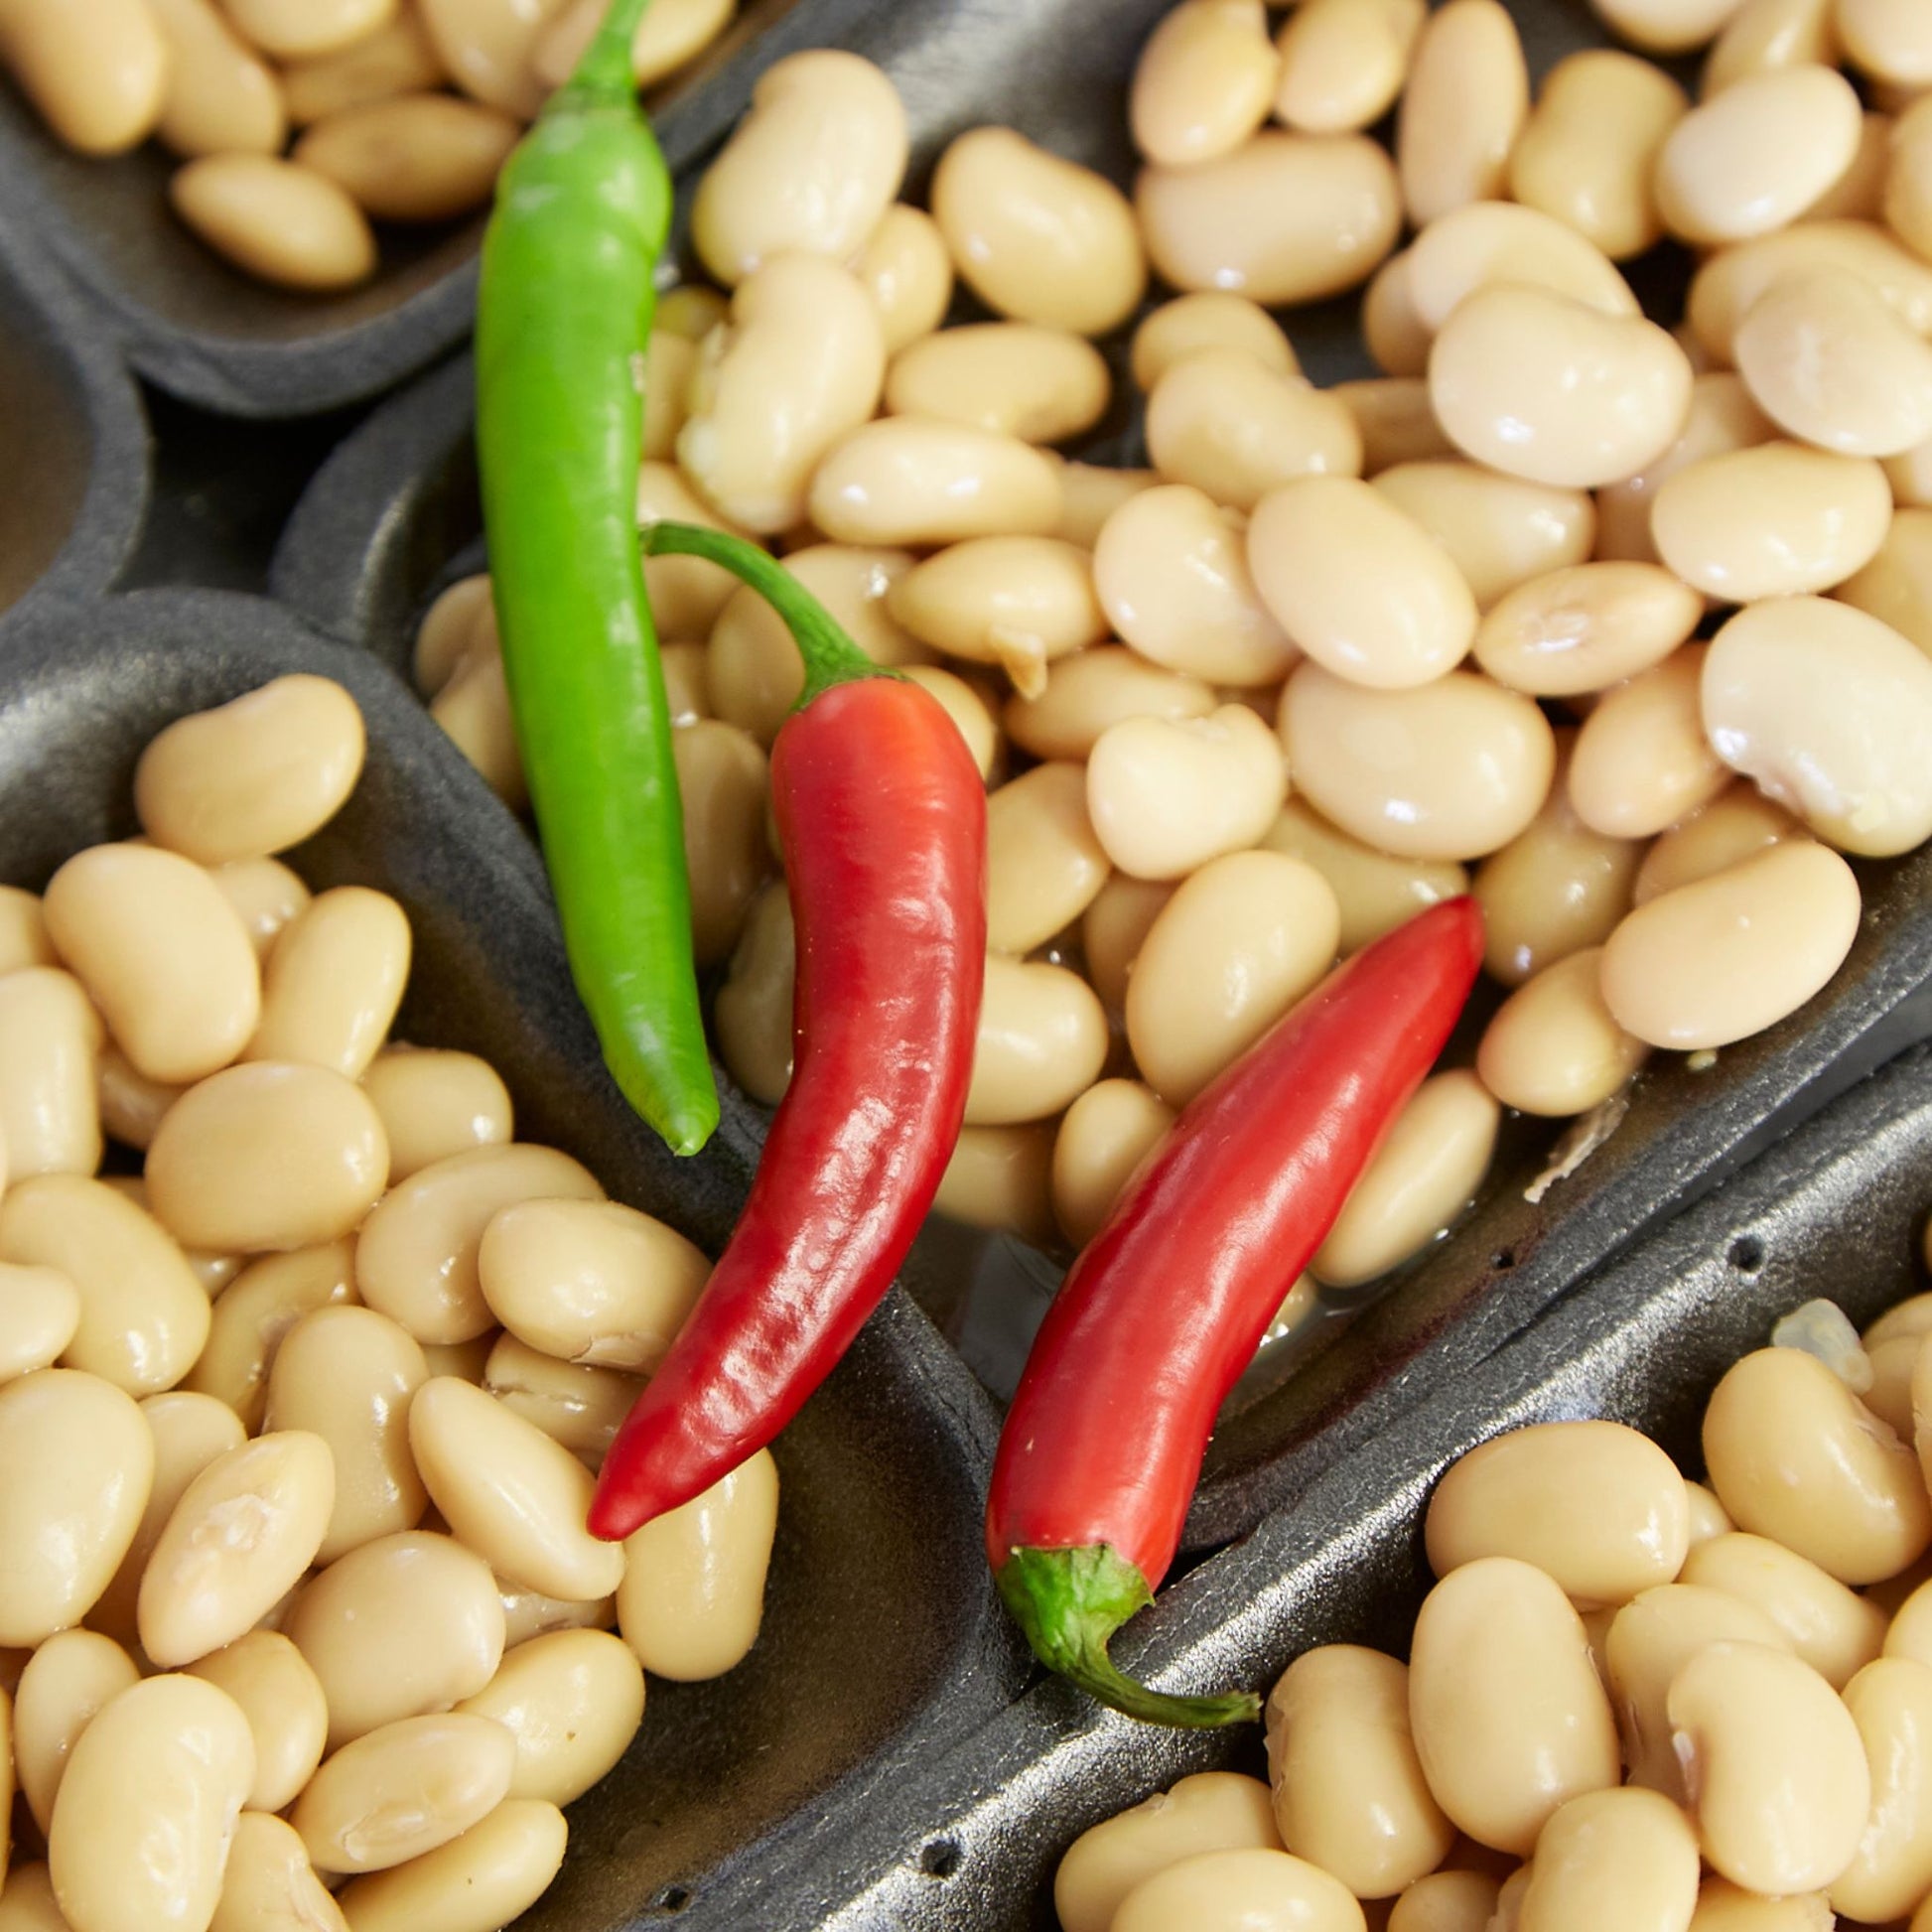 Dishes of beans with red and green chillies